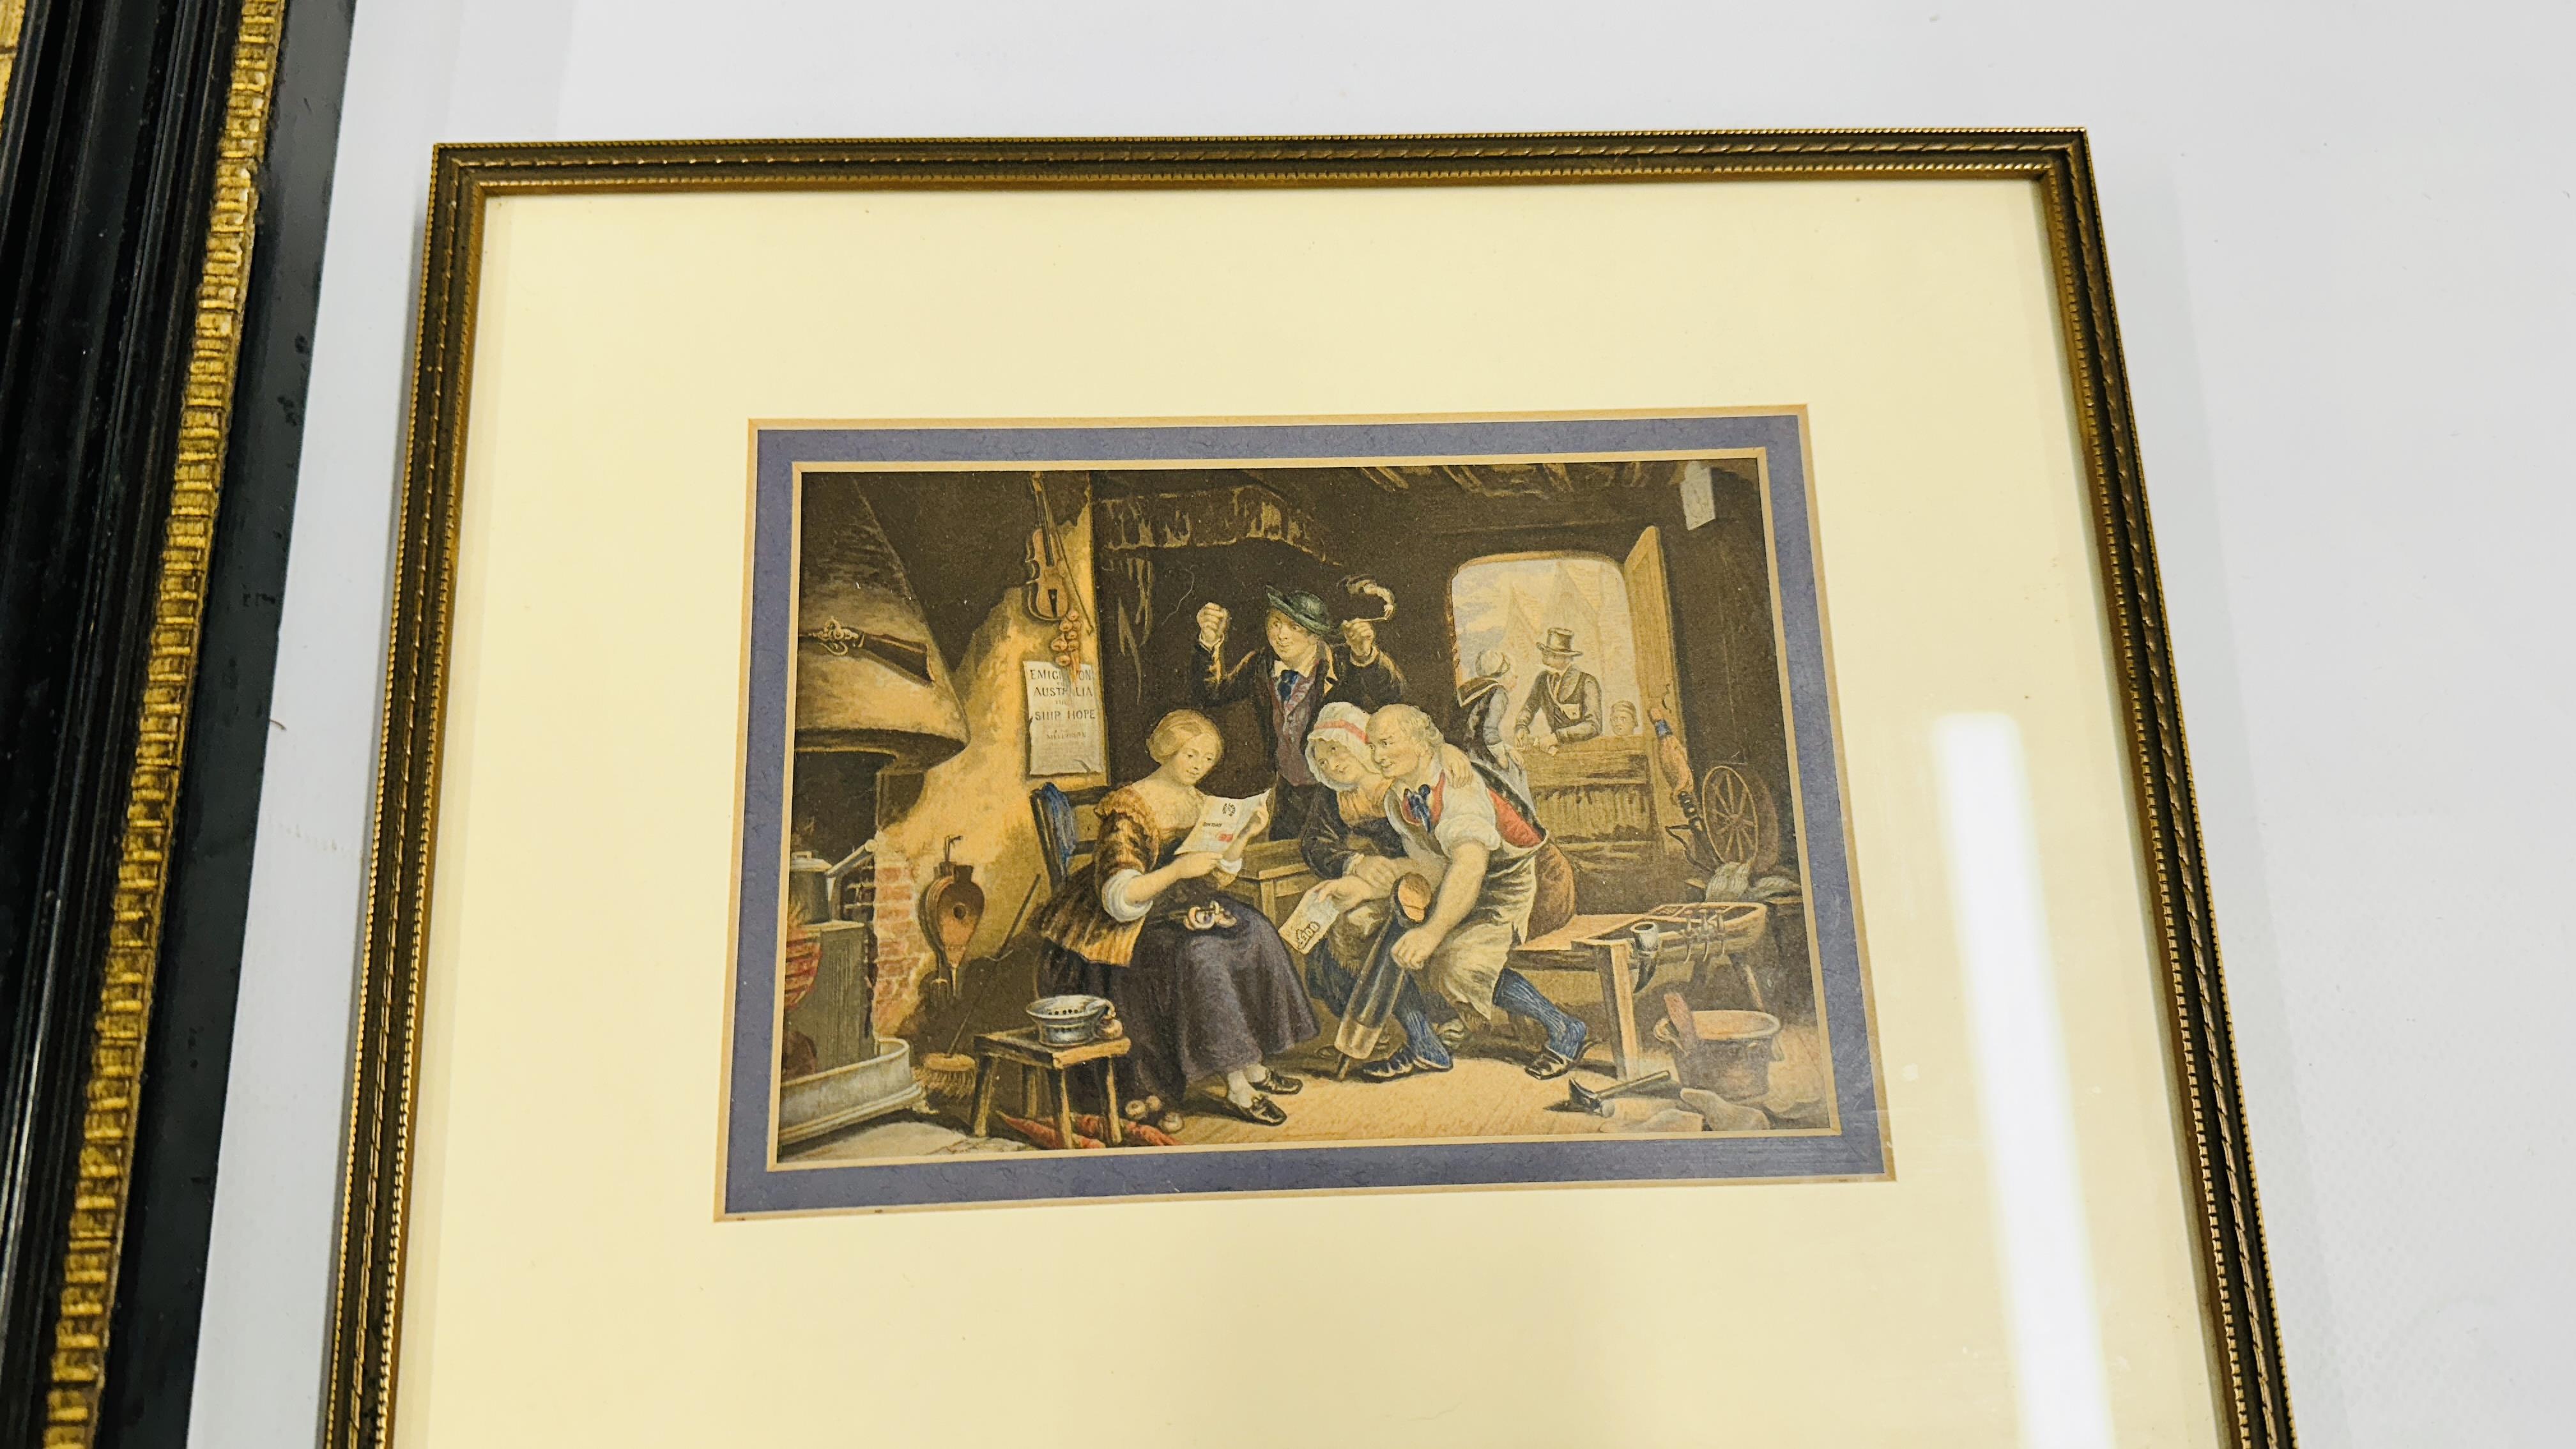 A FRAMED ANTIQUE MEZZOTINT ALONG WIITH 2 BAXTER PRINTS (C1854) NEWS FROM AUSTRALIA AND FROM HOME - Image 4 of 5